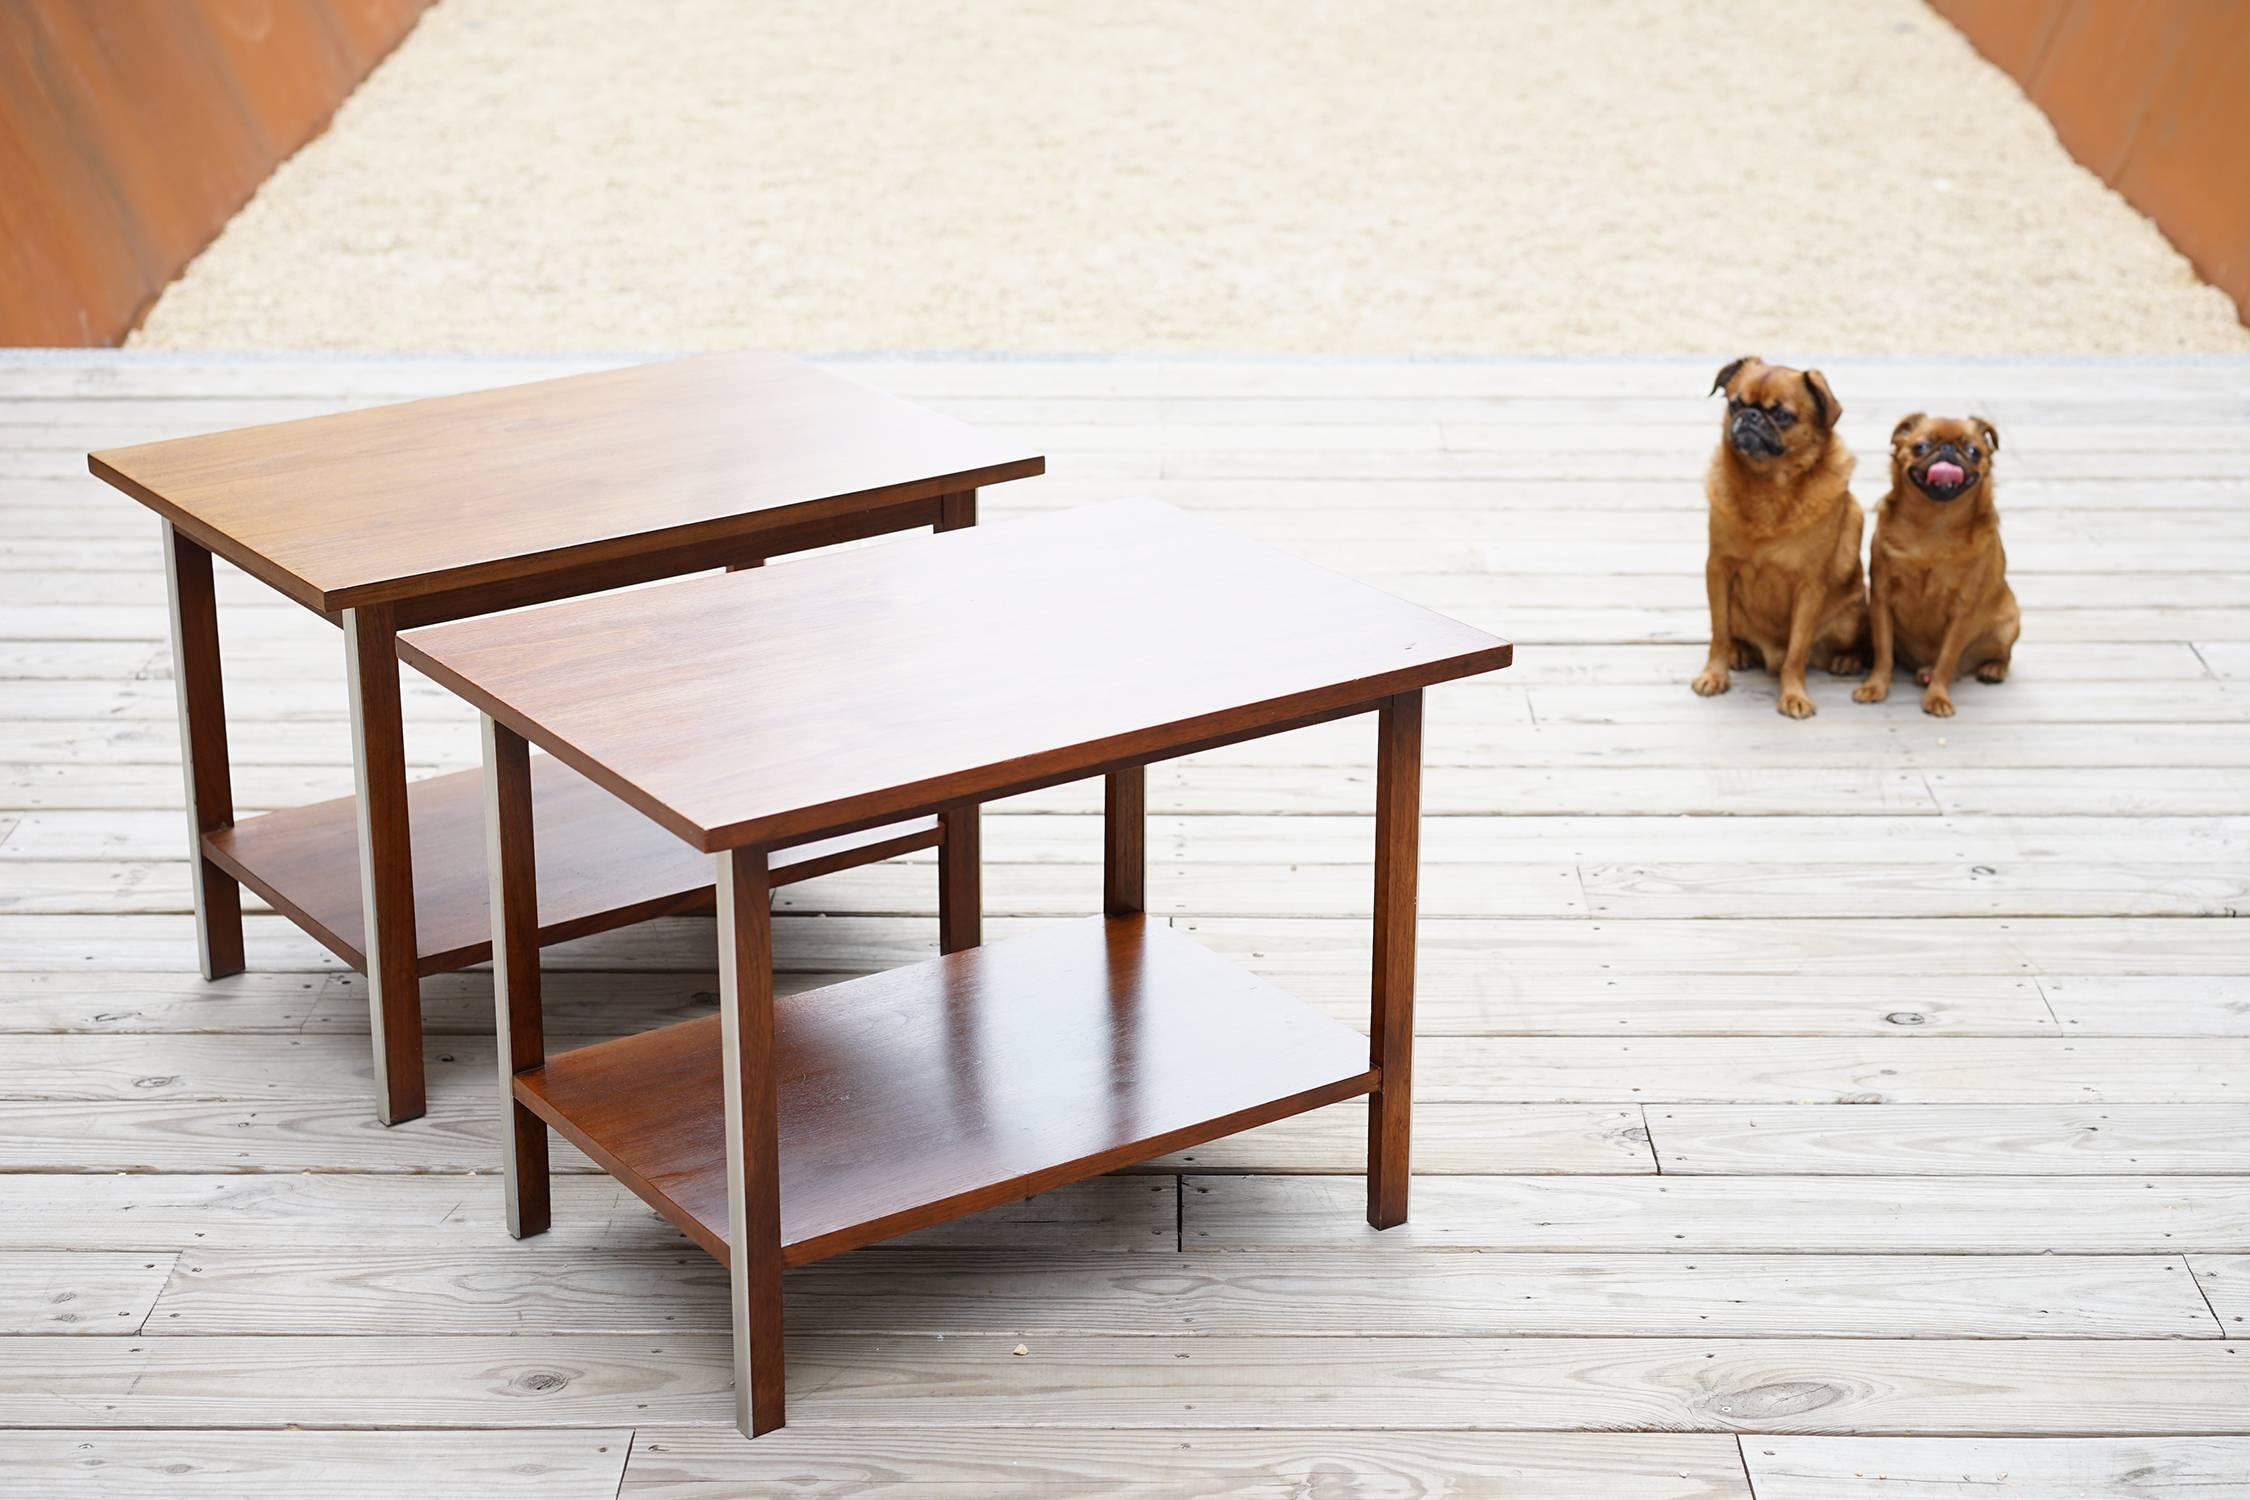 Smart and understated Midcentury walnut tables with contrasting aluminum trim. Warm tone and lovely grain. Model number 487. Manufactured in Grand Rapids, Michigan by Calvin Furniture.